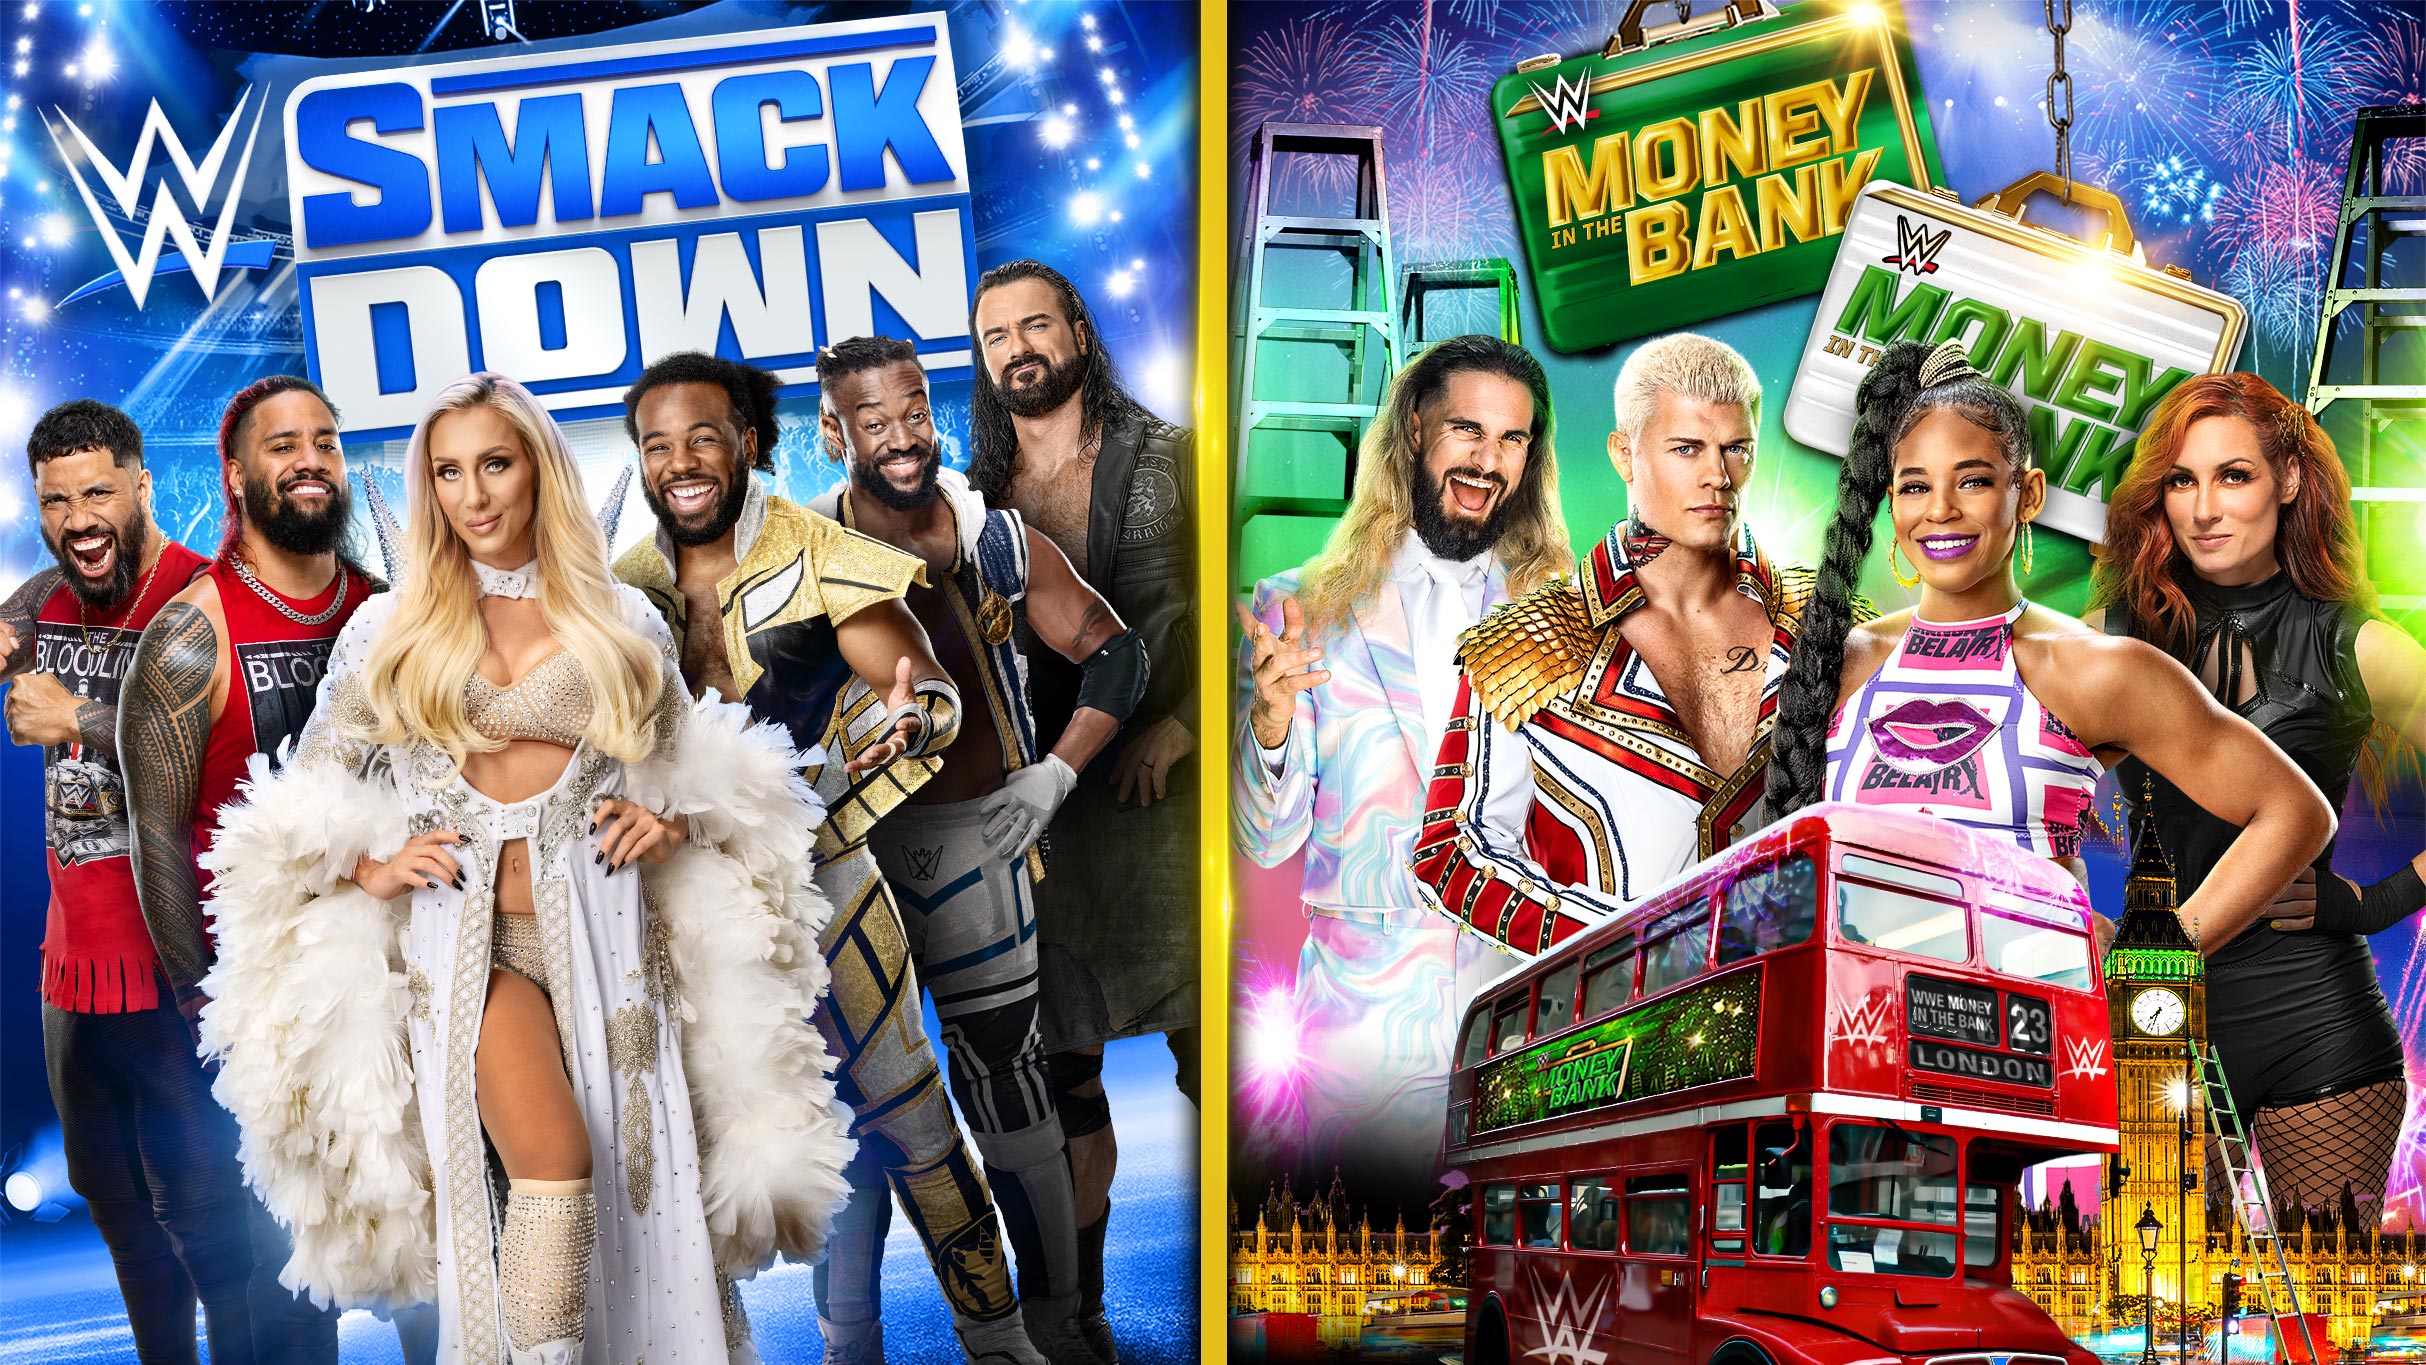 WWE Smackdown & Money in the Bank Combo Ticket in London promo photo for WWE presale offer code